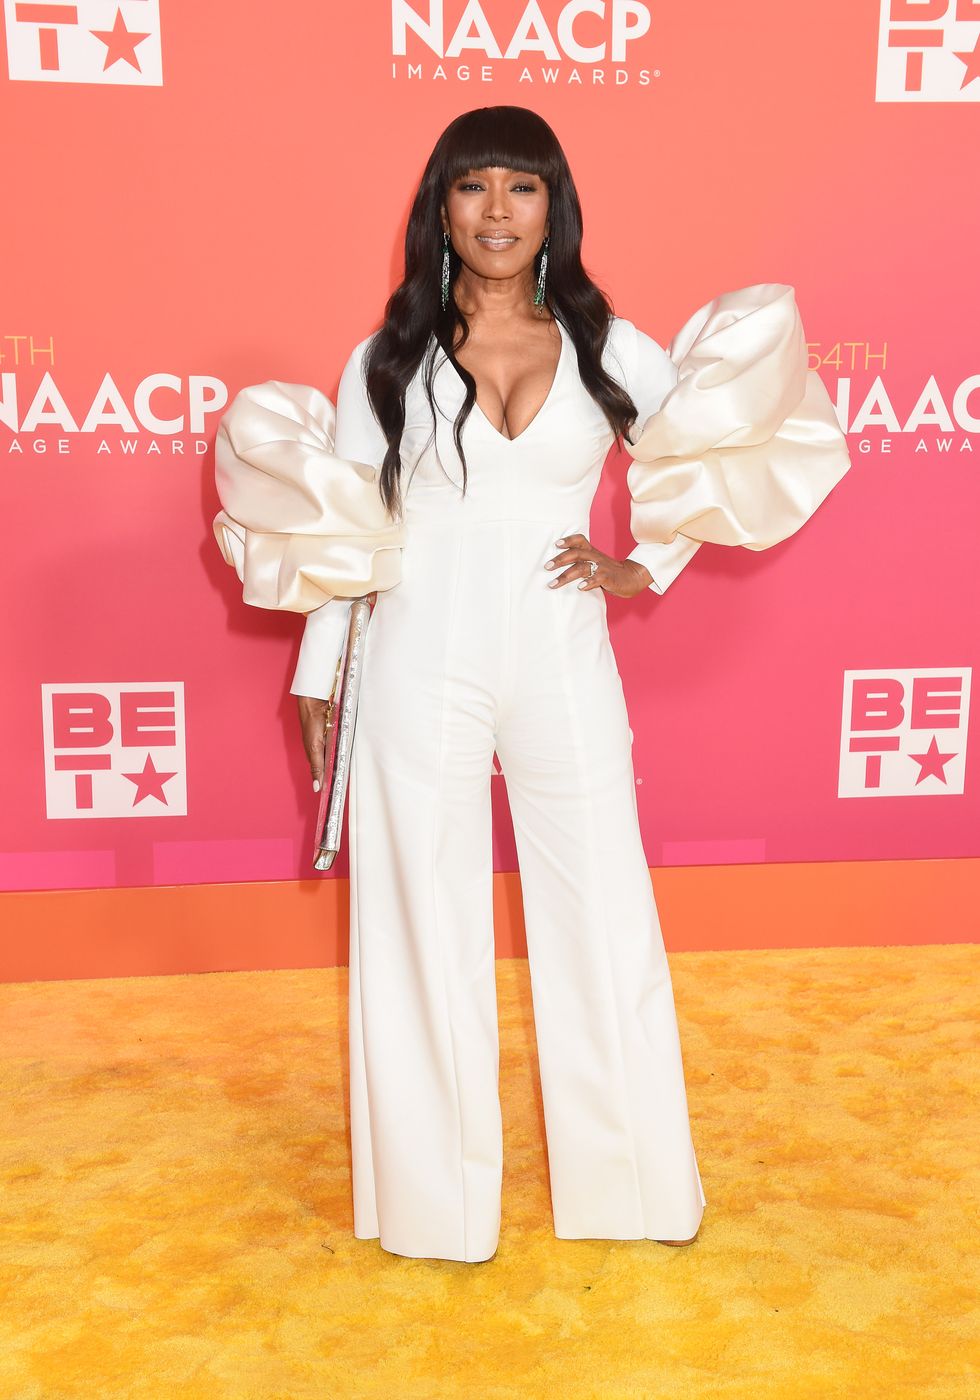 angela bassett at the 54th naacp image awards held at the pasadena civic auditorium on february 25, 2023 in pasadena, california photo by gilbert floresvariety via getty images